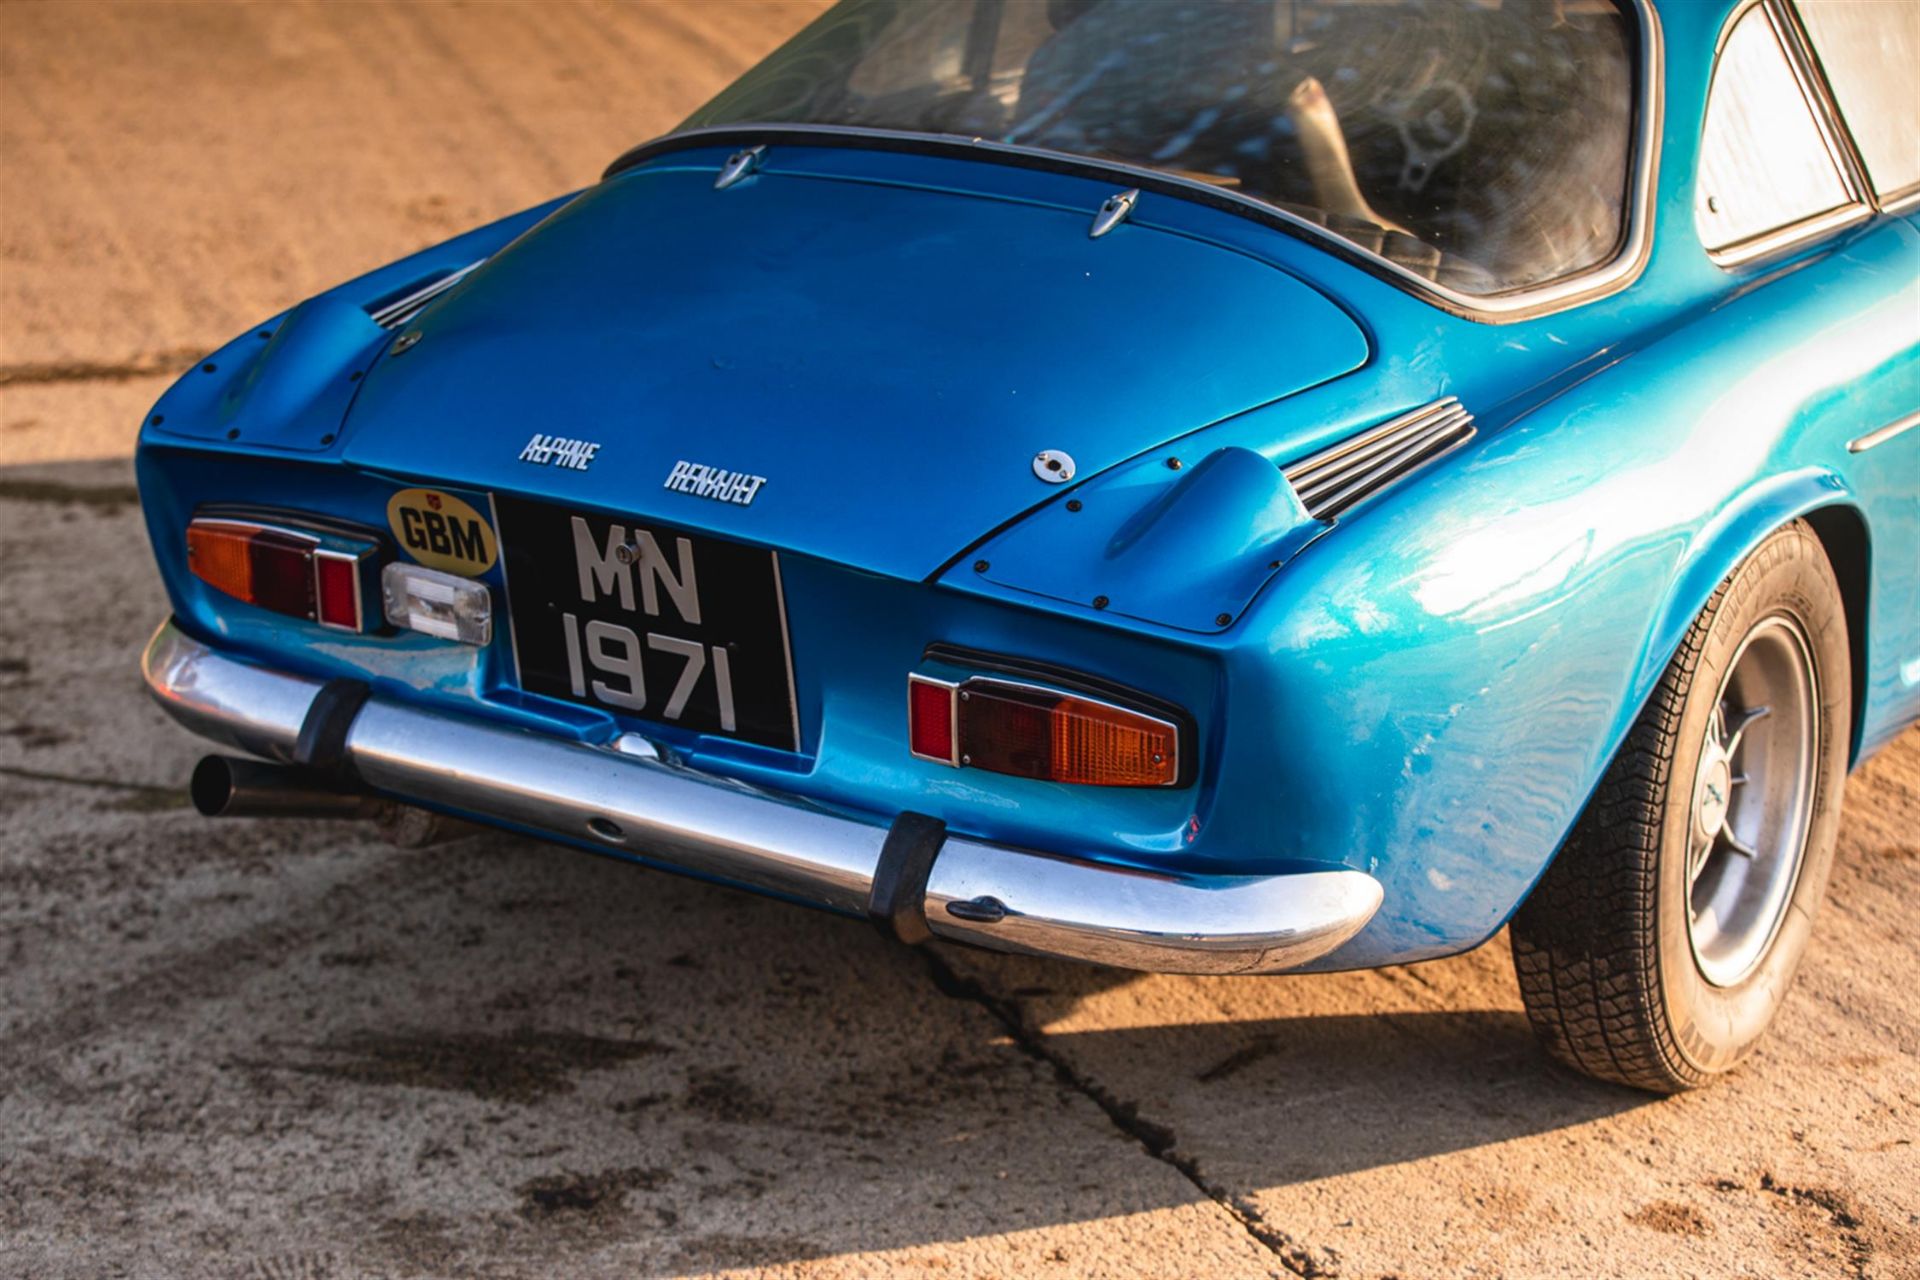 1972 Renault Alpine A110 - Image 10 of 10